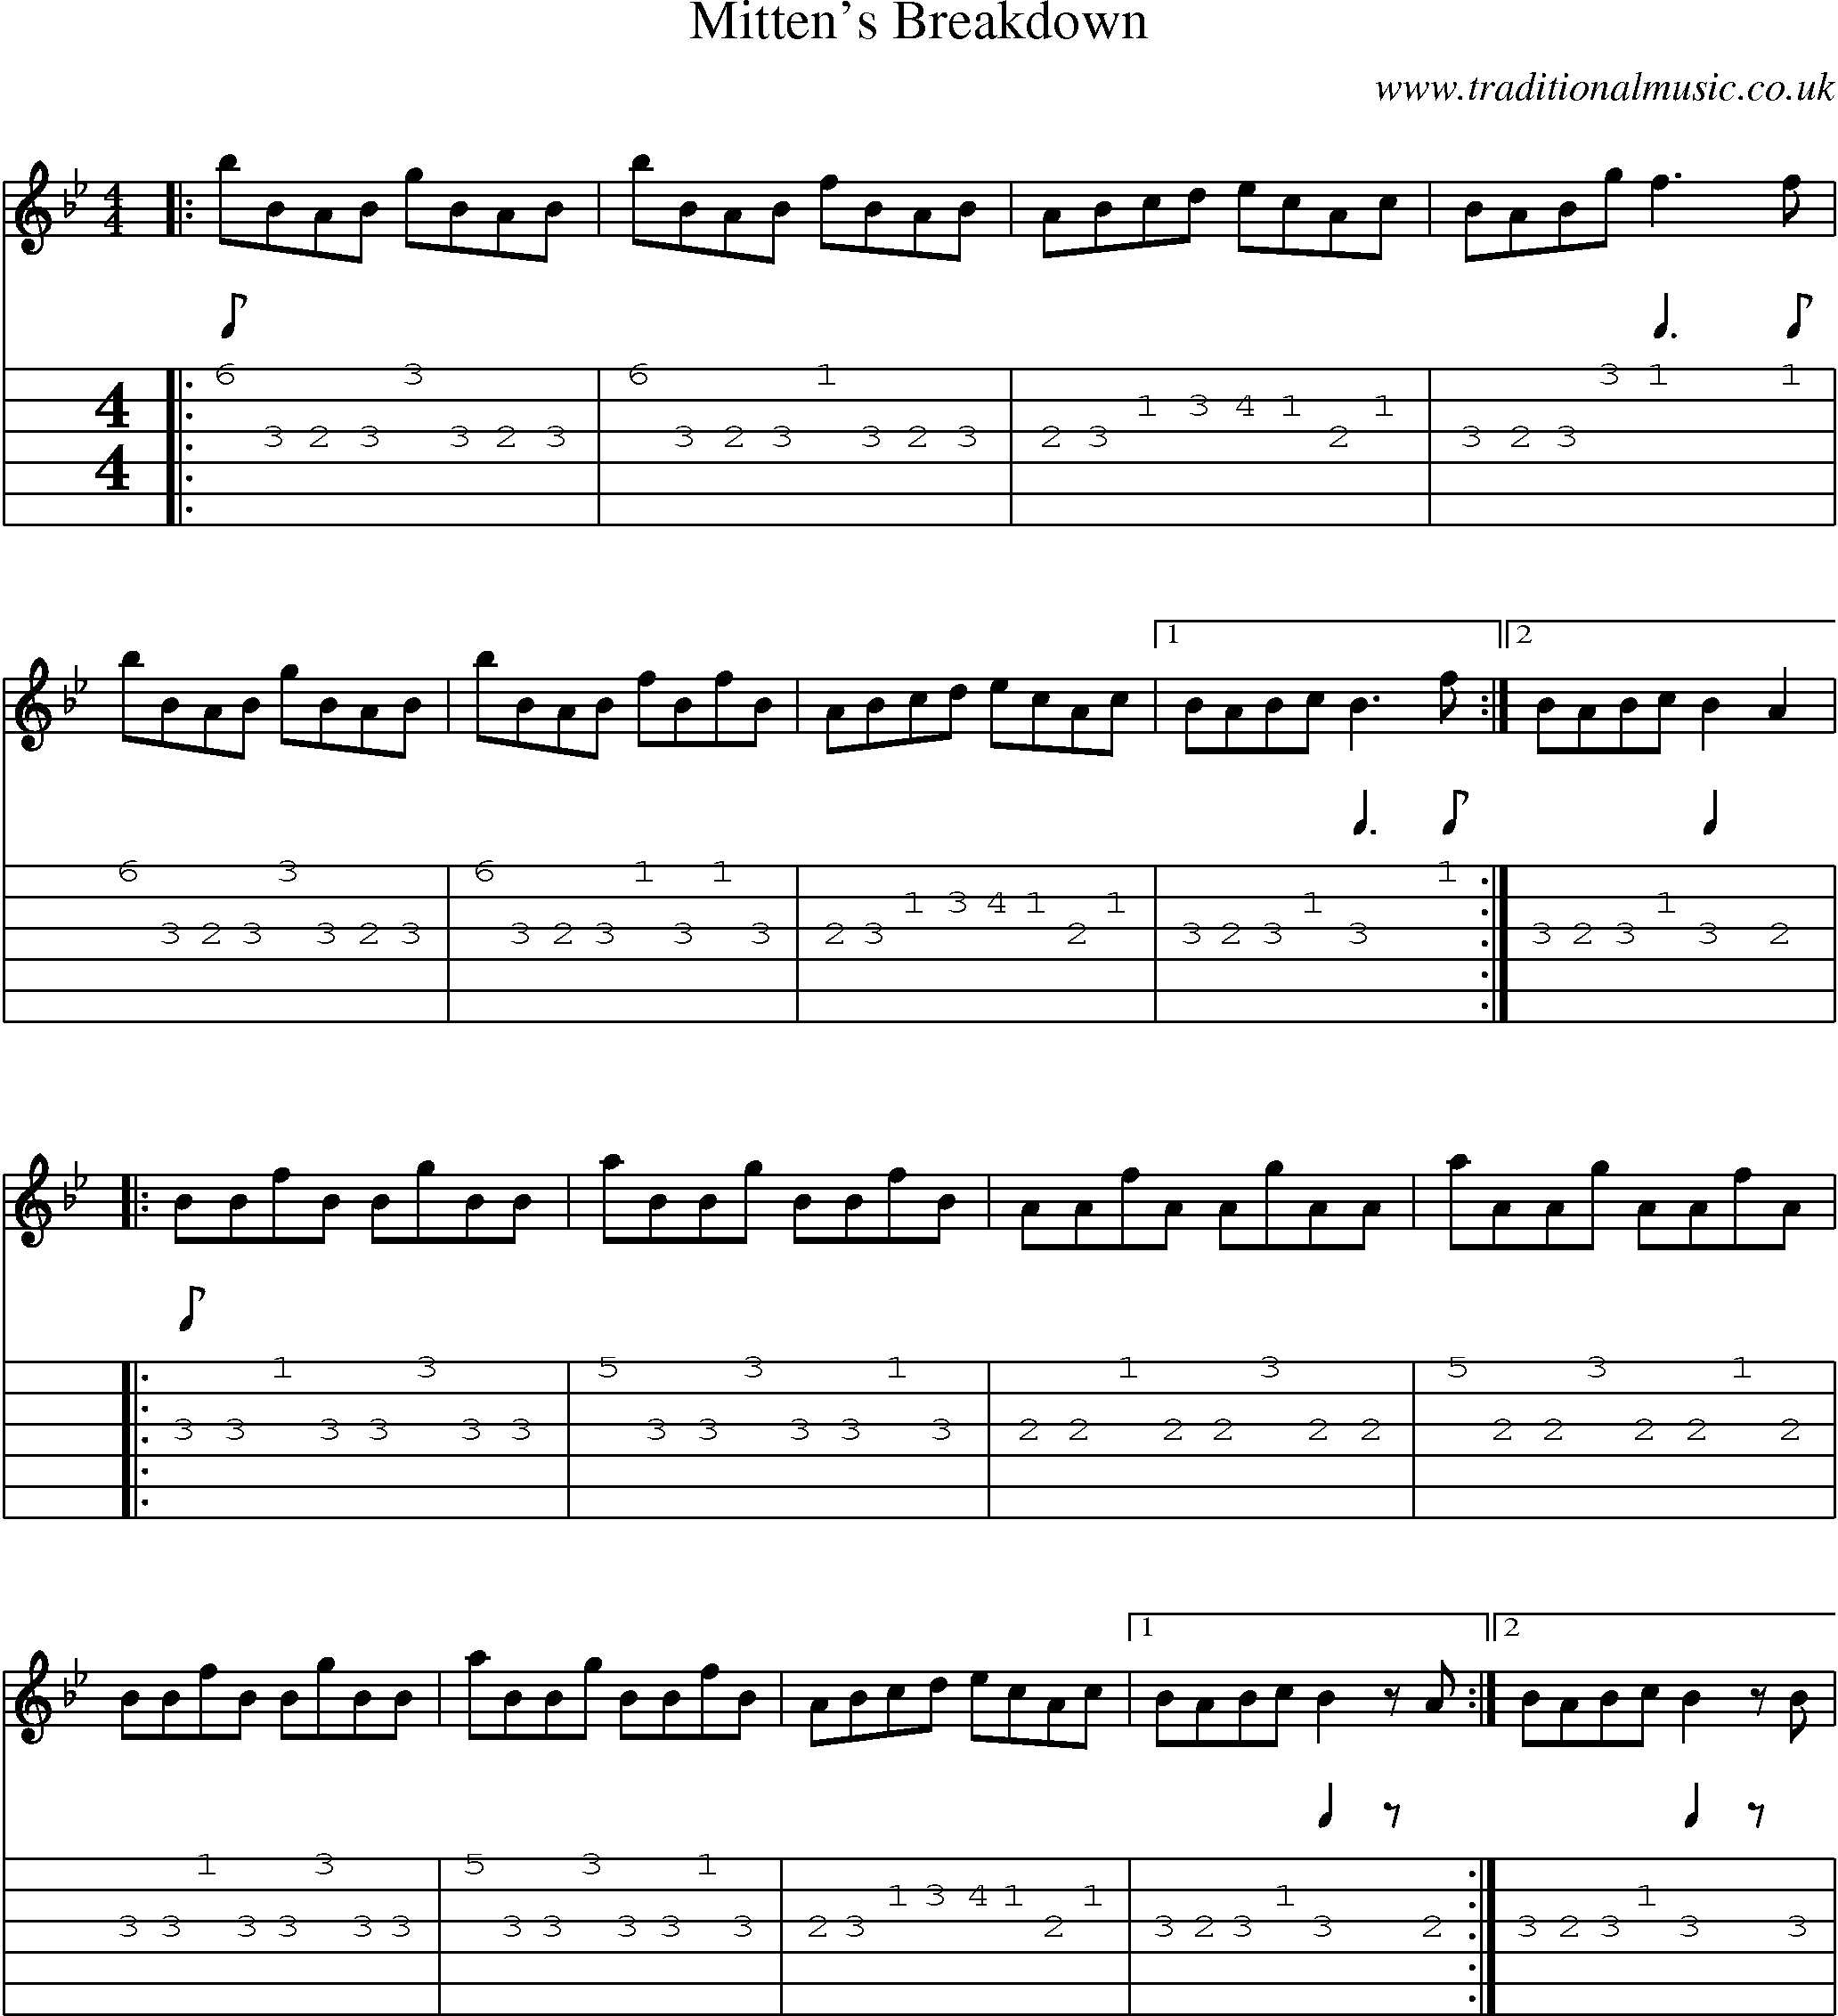 Music Score and Guitar Tabs for Mittens Breakdown